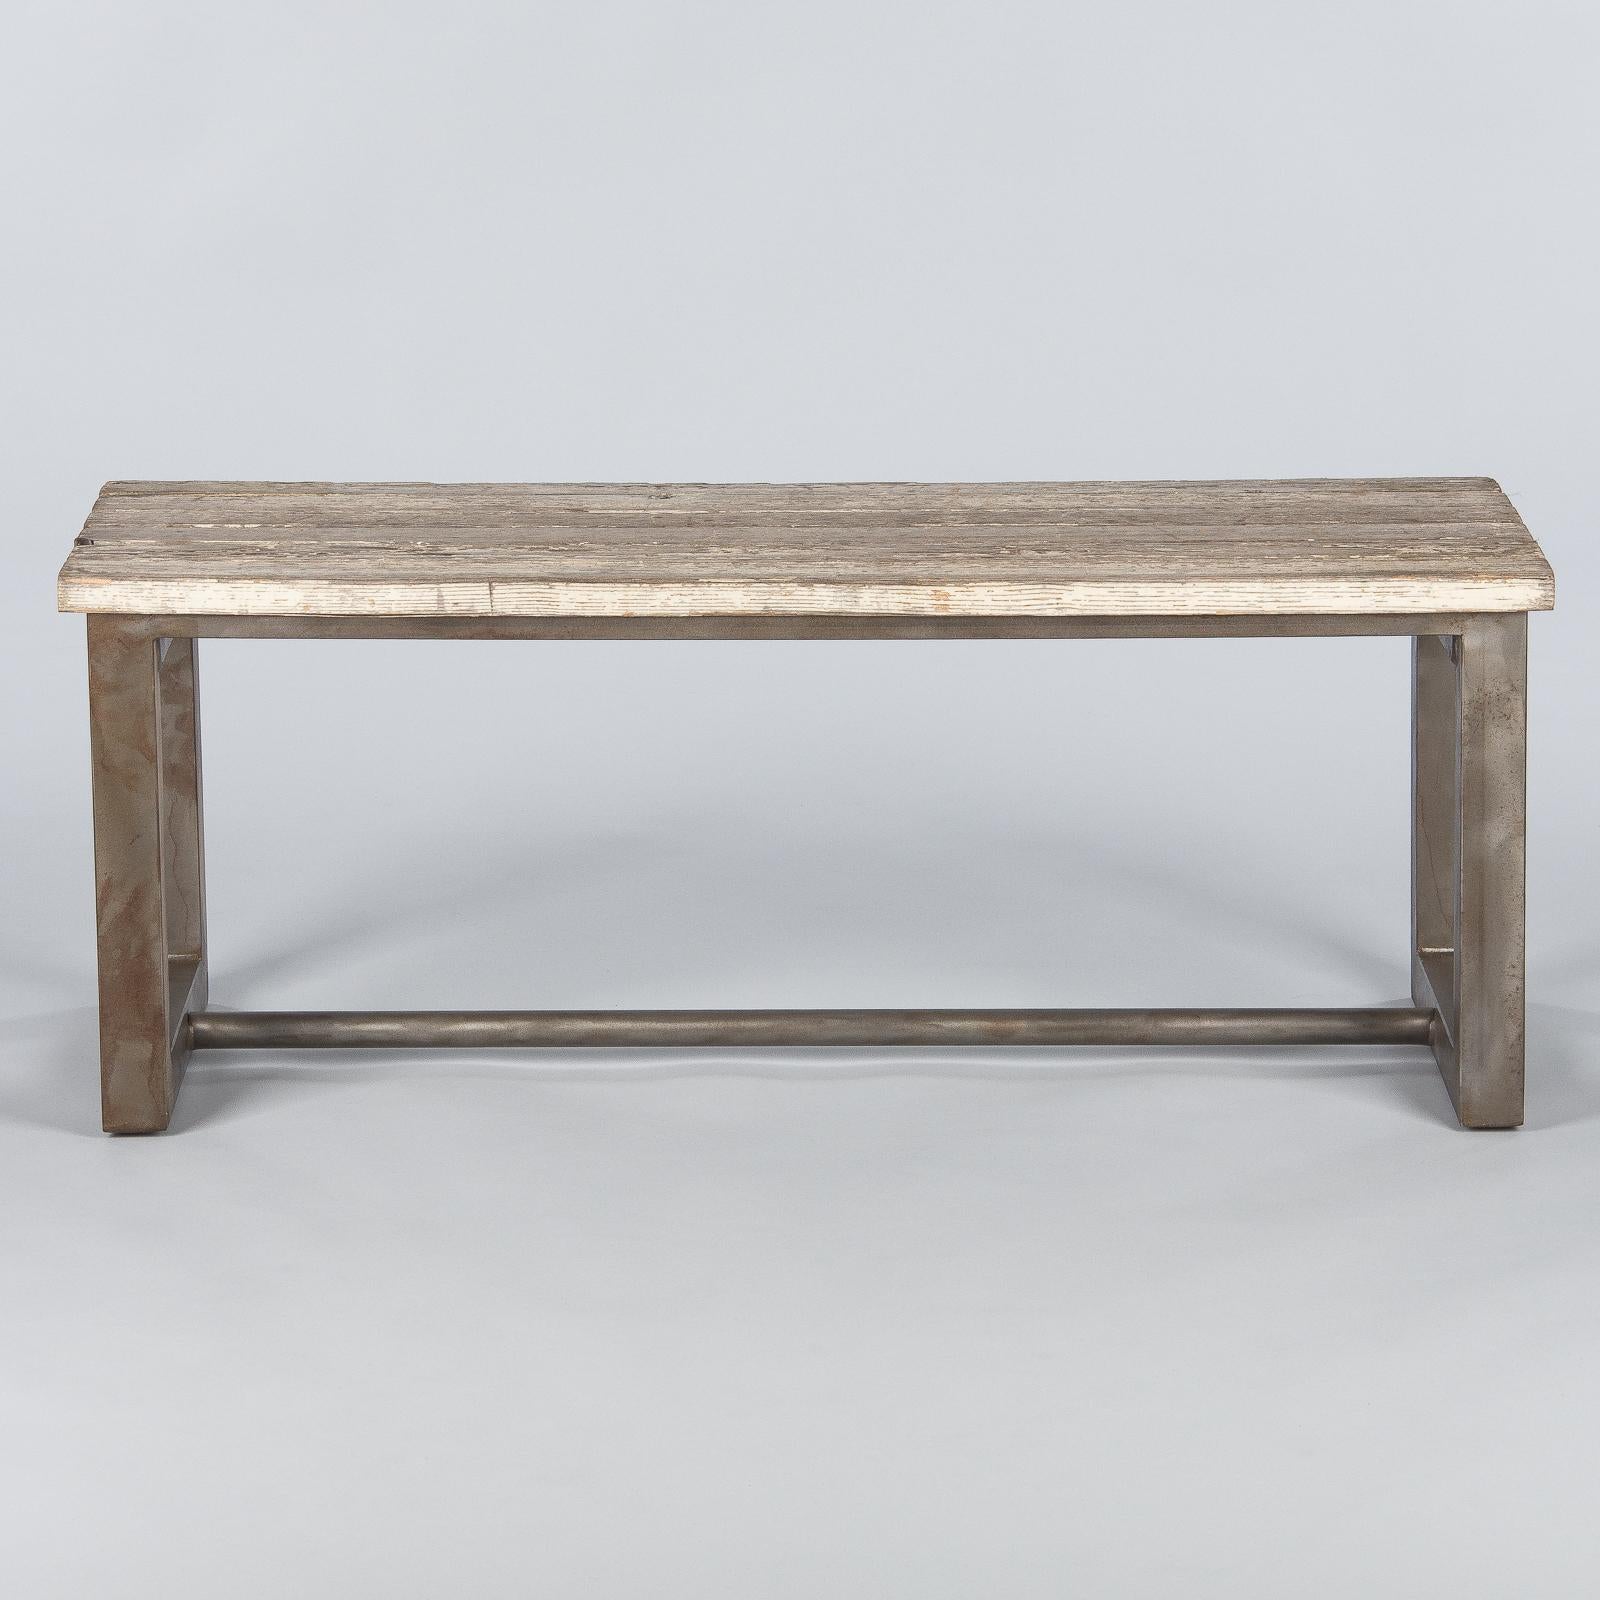 Steel Pair of French Midcentury Industrial Benches